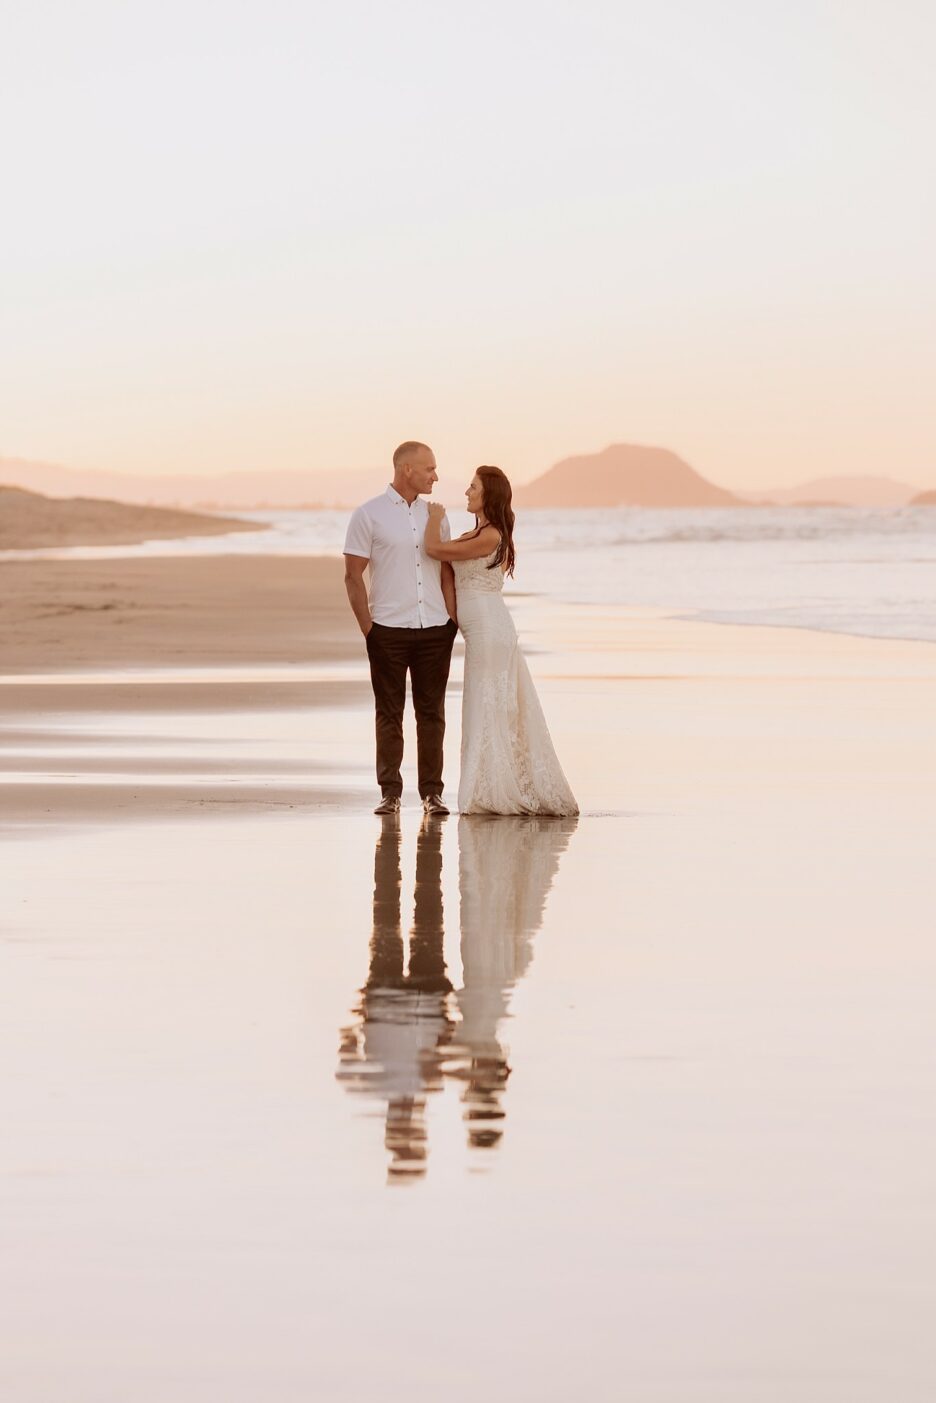 beach wedding photography with reflections in water